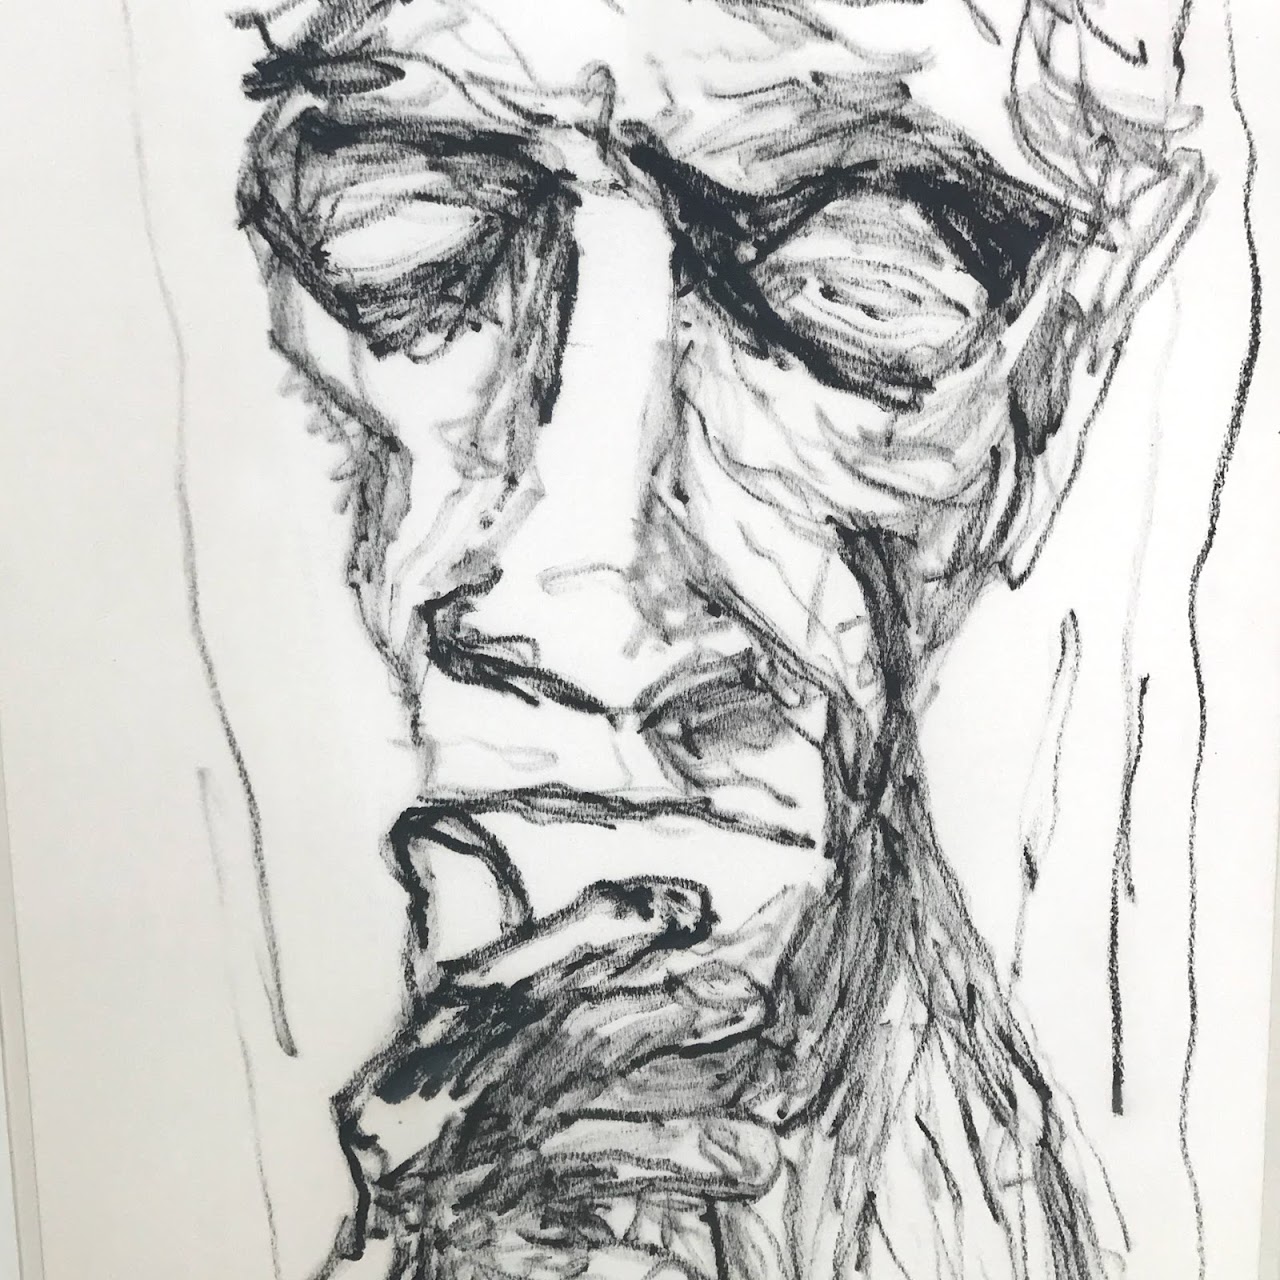 Expressionist Signed Charcoal Portrait Drawing